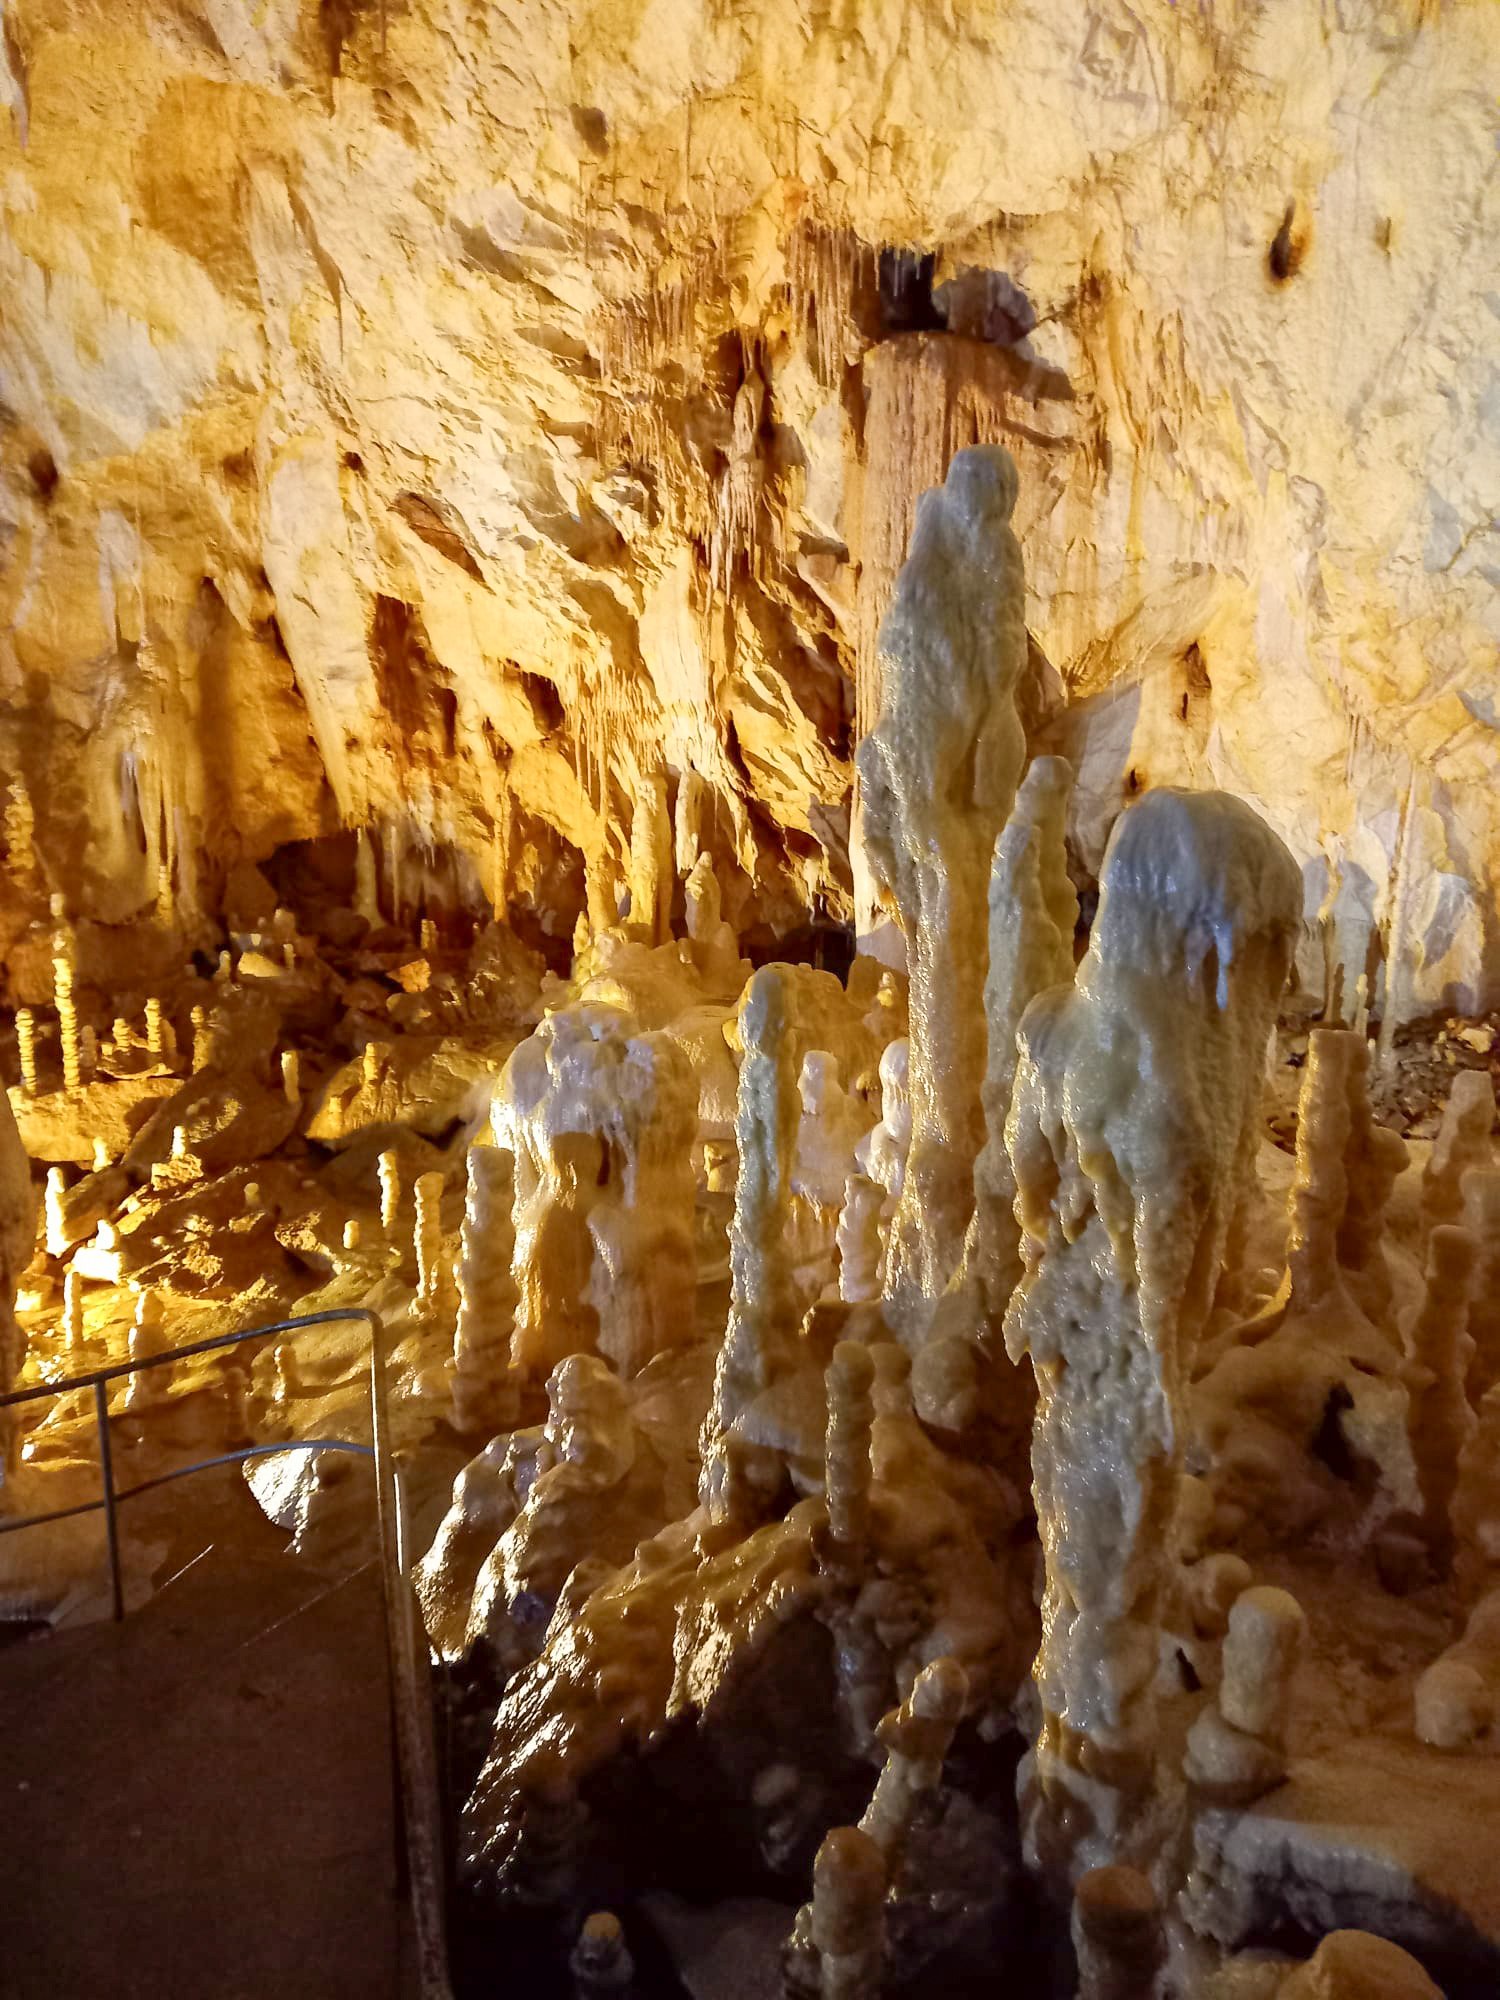 The Bears' Cave in Romania, adorned with an abundance of stalactites and stalagmites.